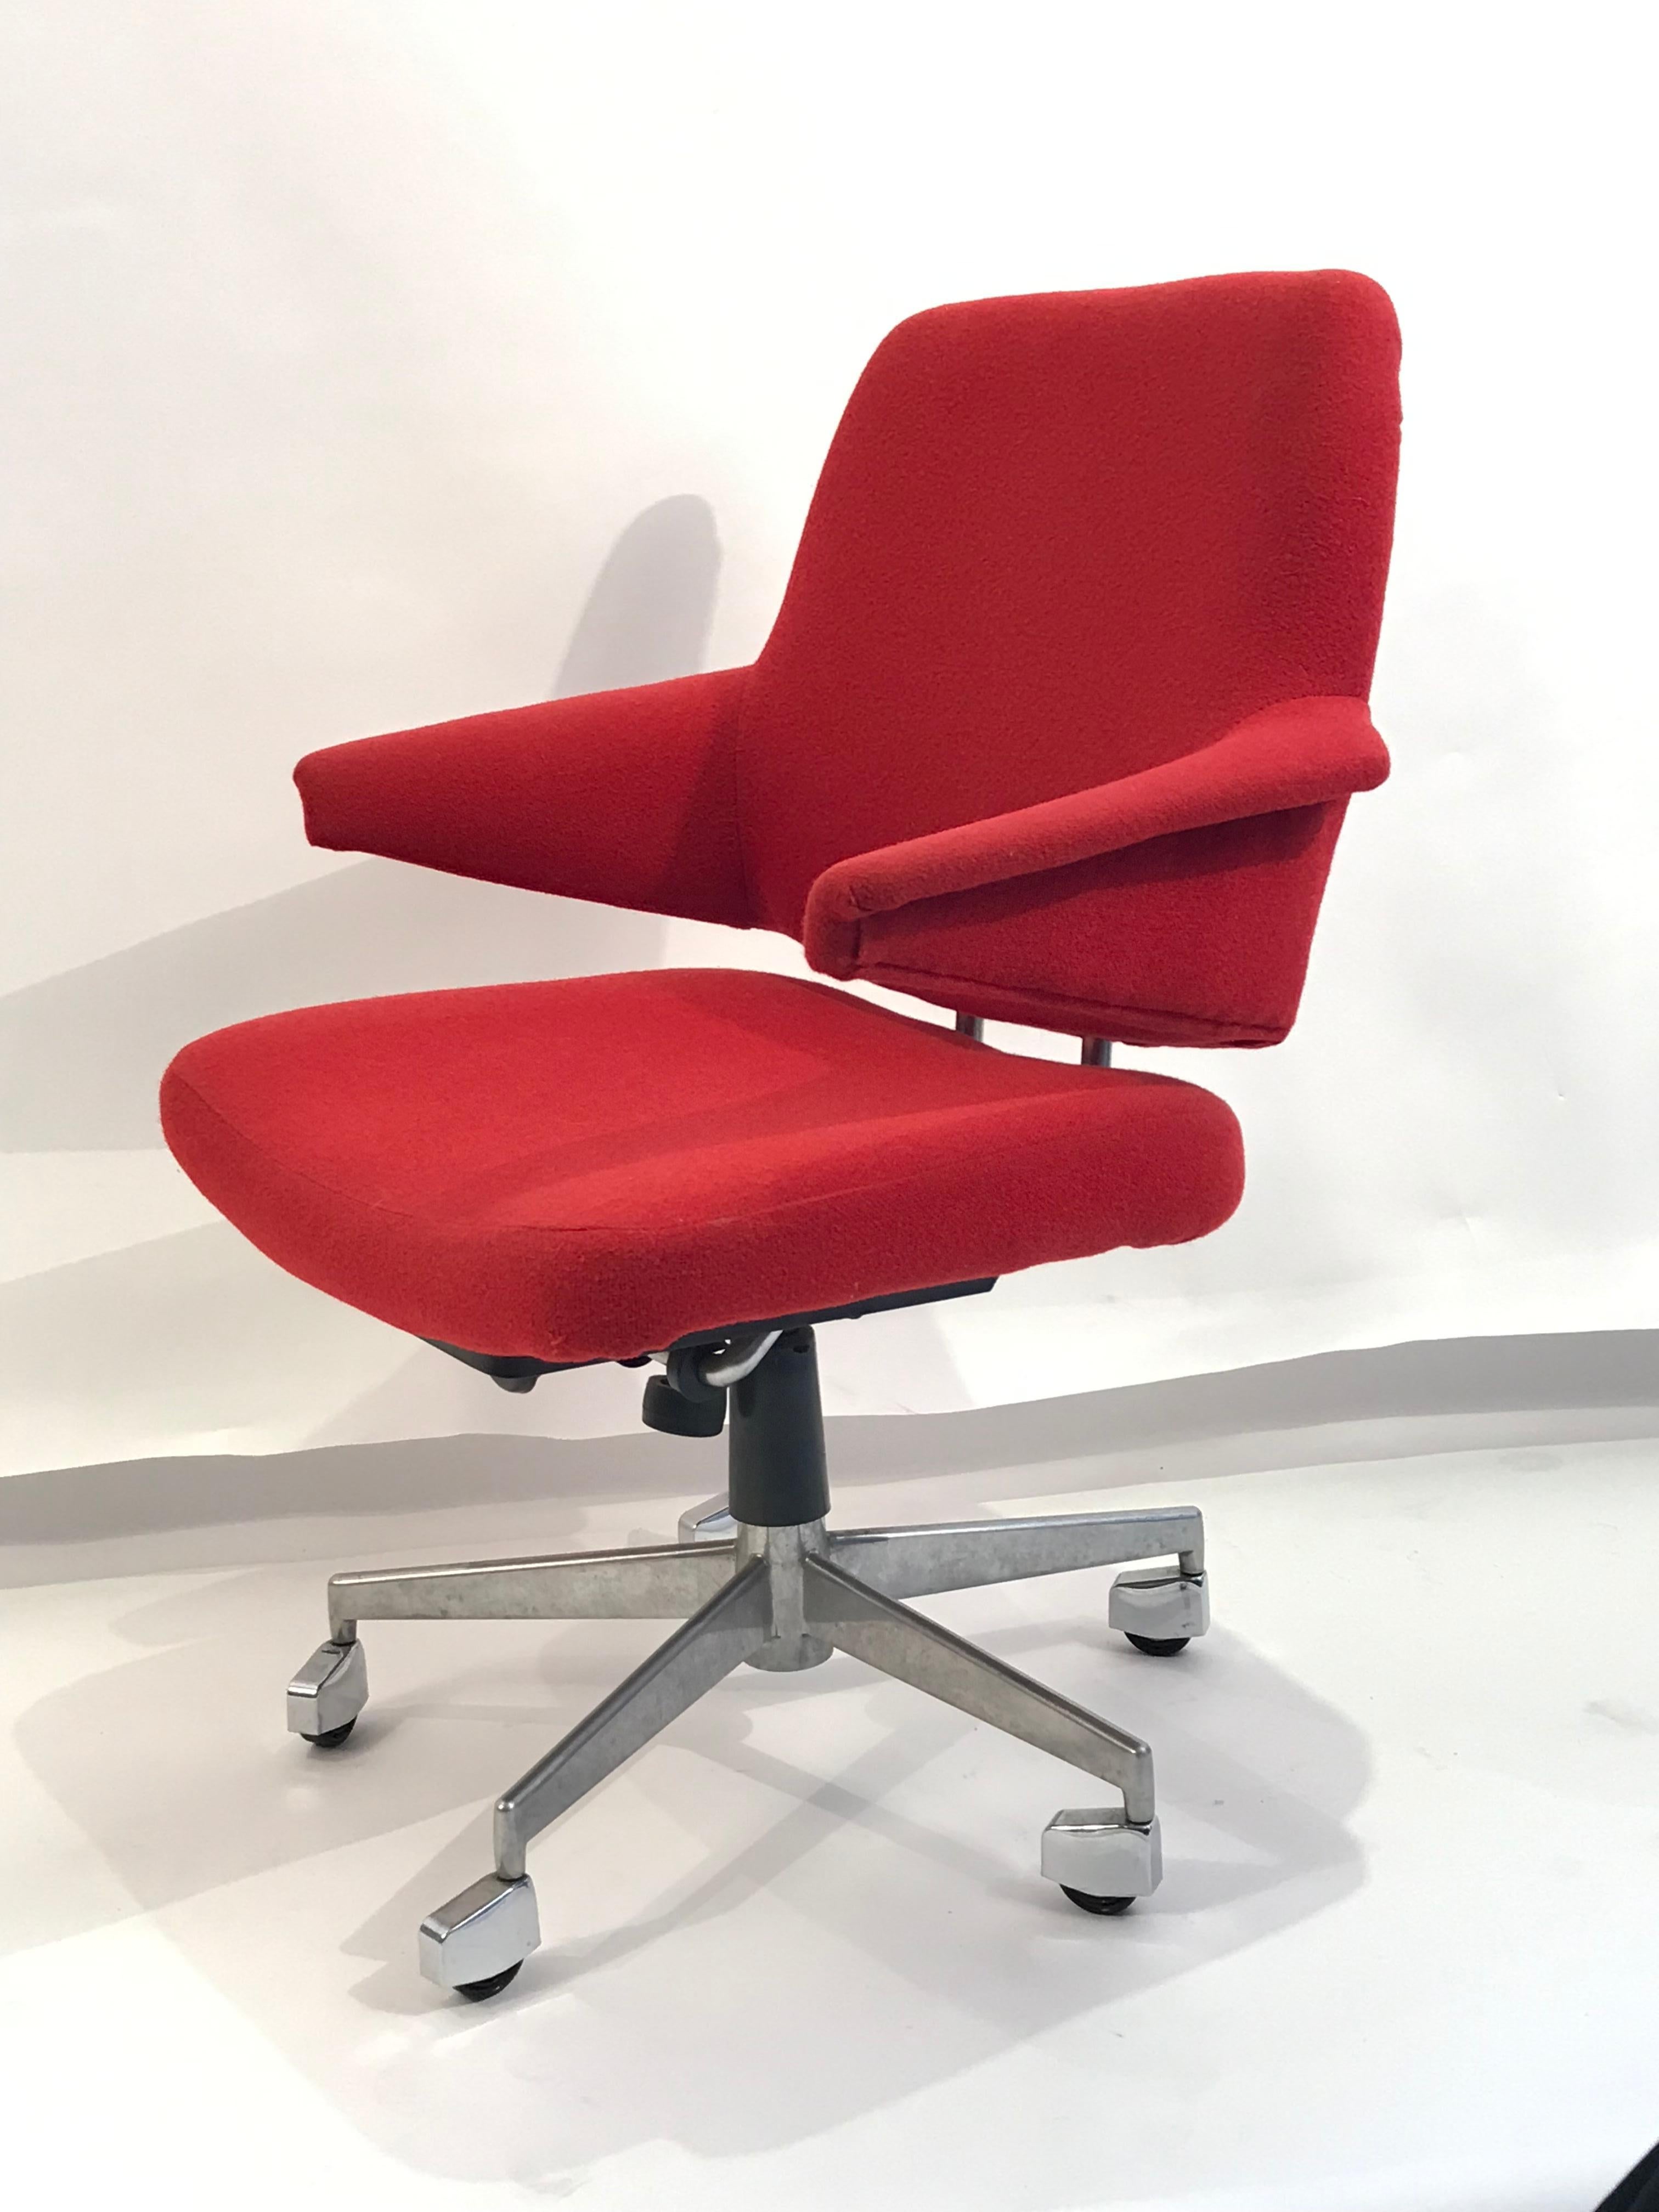 Vintage chair built in the 1960s with sleek lines and multi adjustable design. Solid as a tank with wheels and a swivel base, independently reclining back, adjustable tension and more. Cherry red fabric. Super attractive and comfortable. Desk or